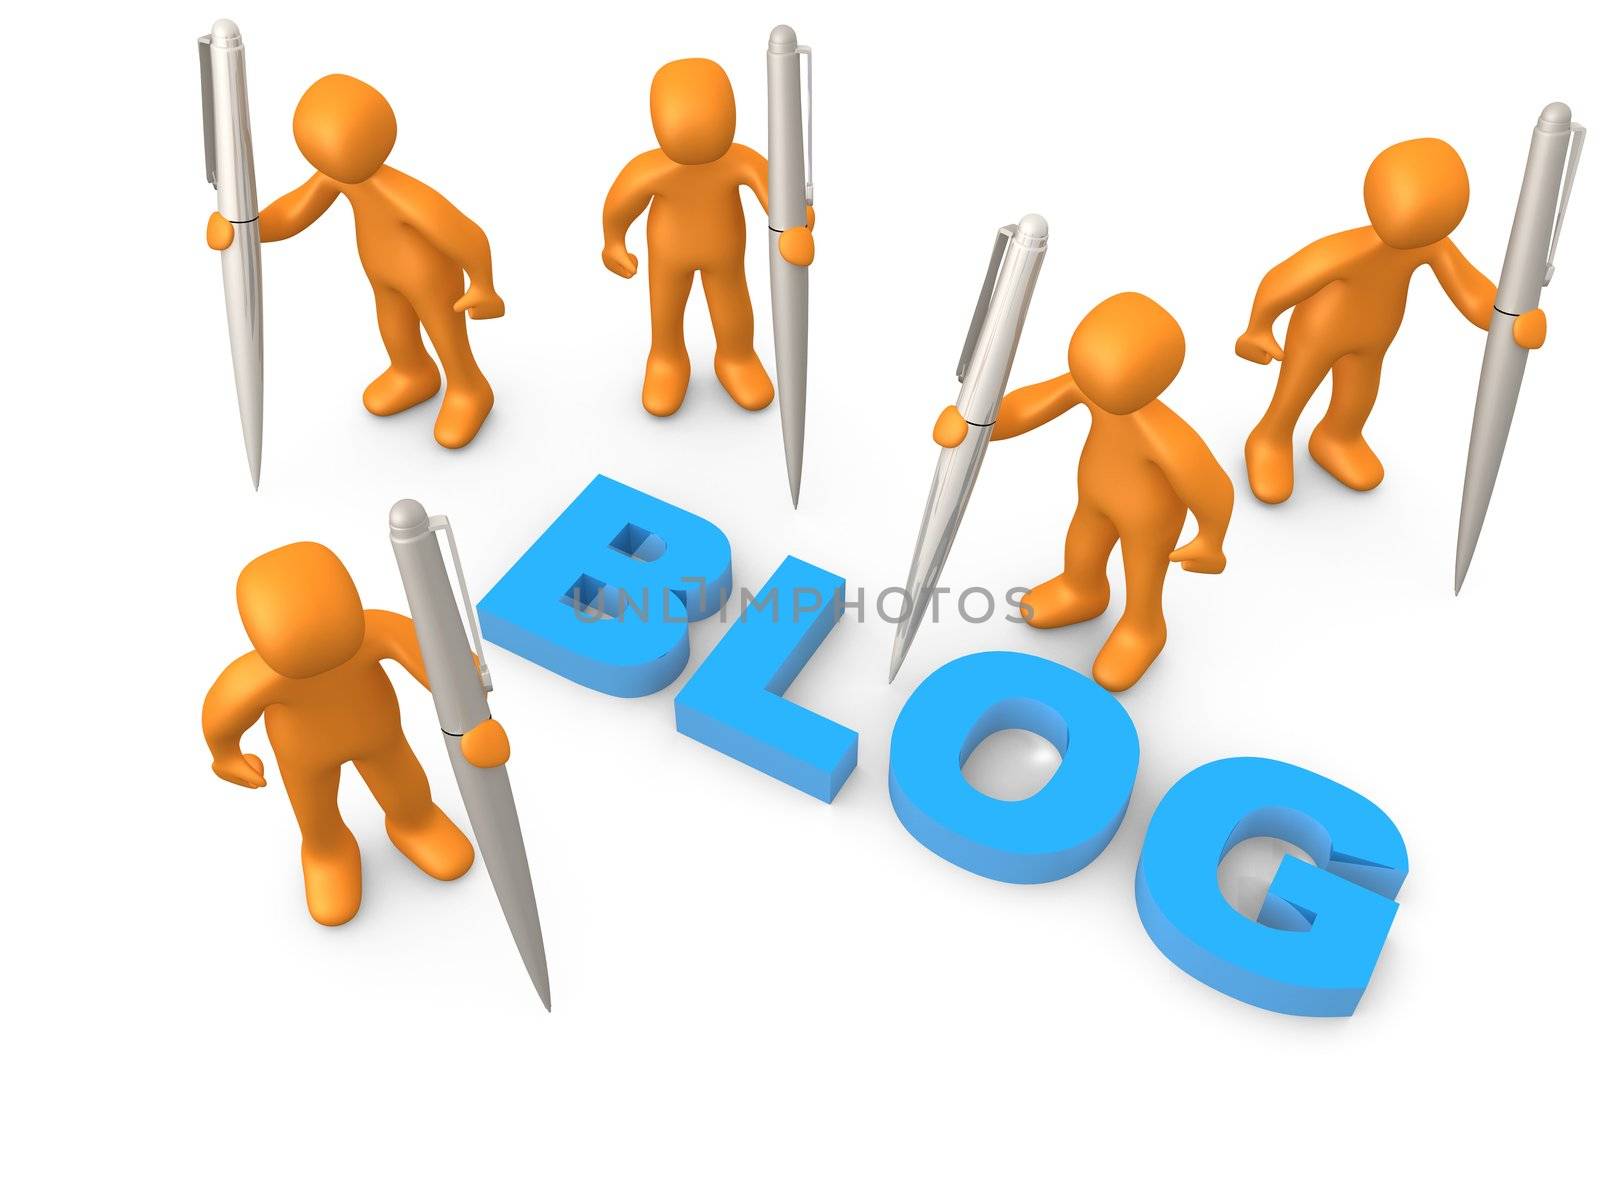 3d people holding large pens standing next to the word blog.